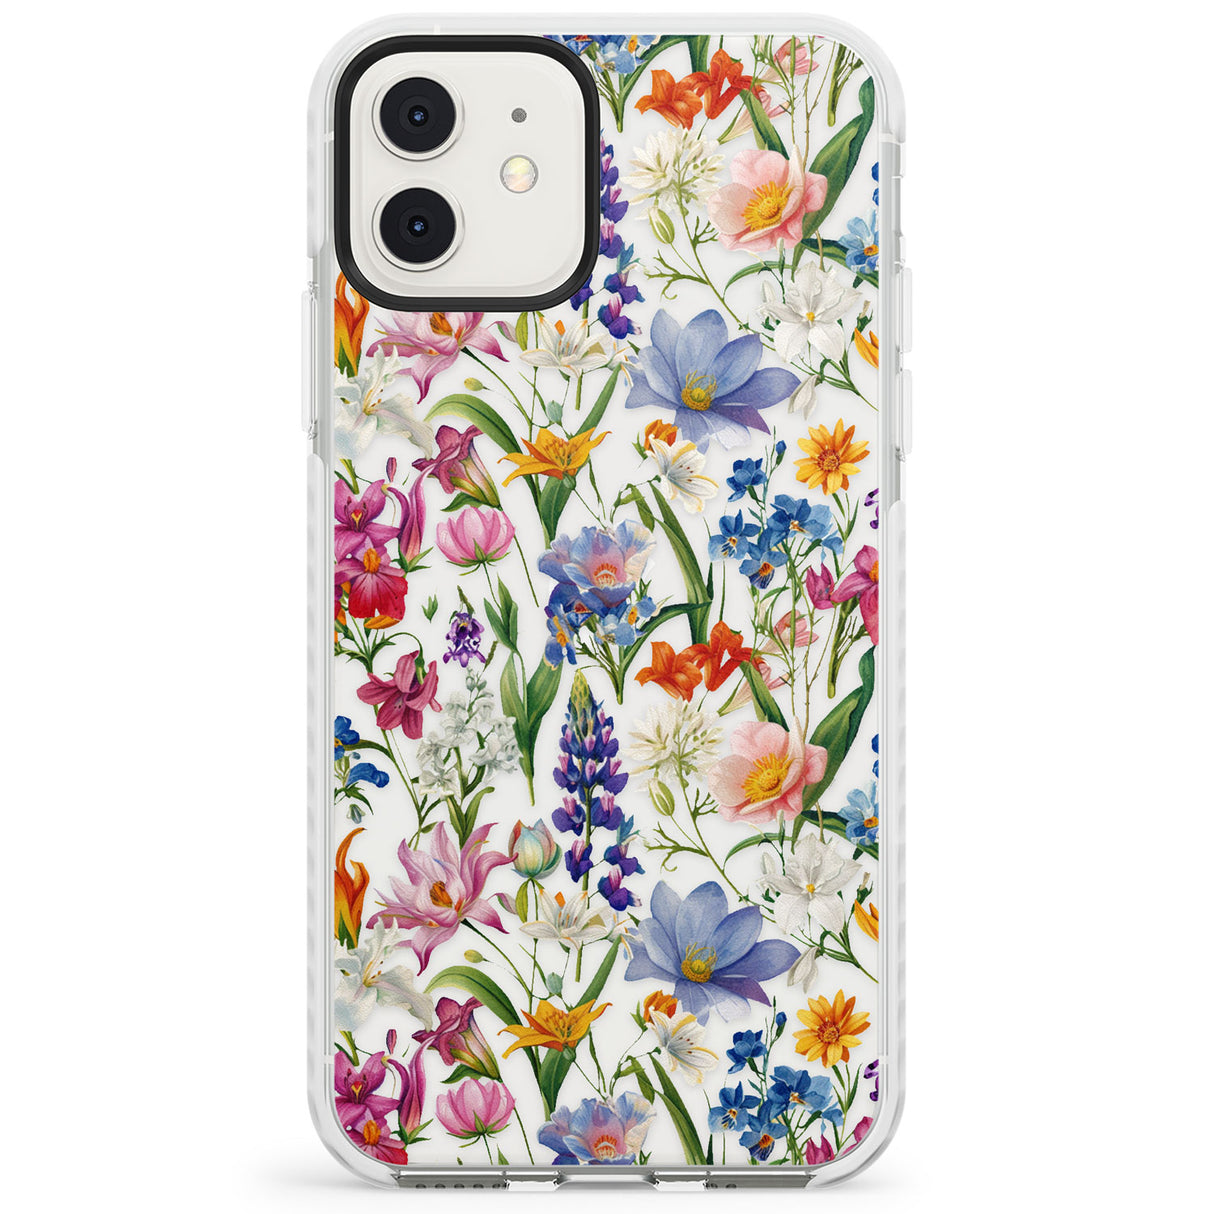 Vintage Wildflowers Impact Phone Case for iPhone 11, iphone 12